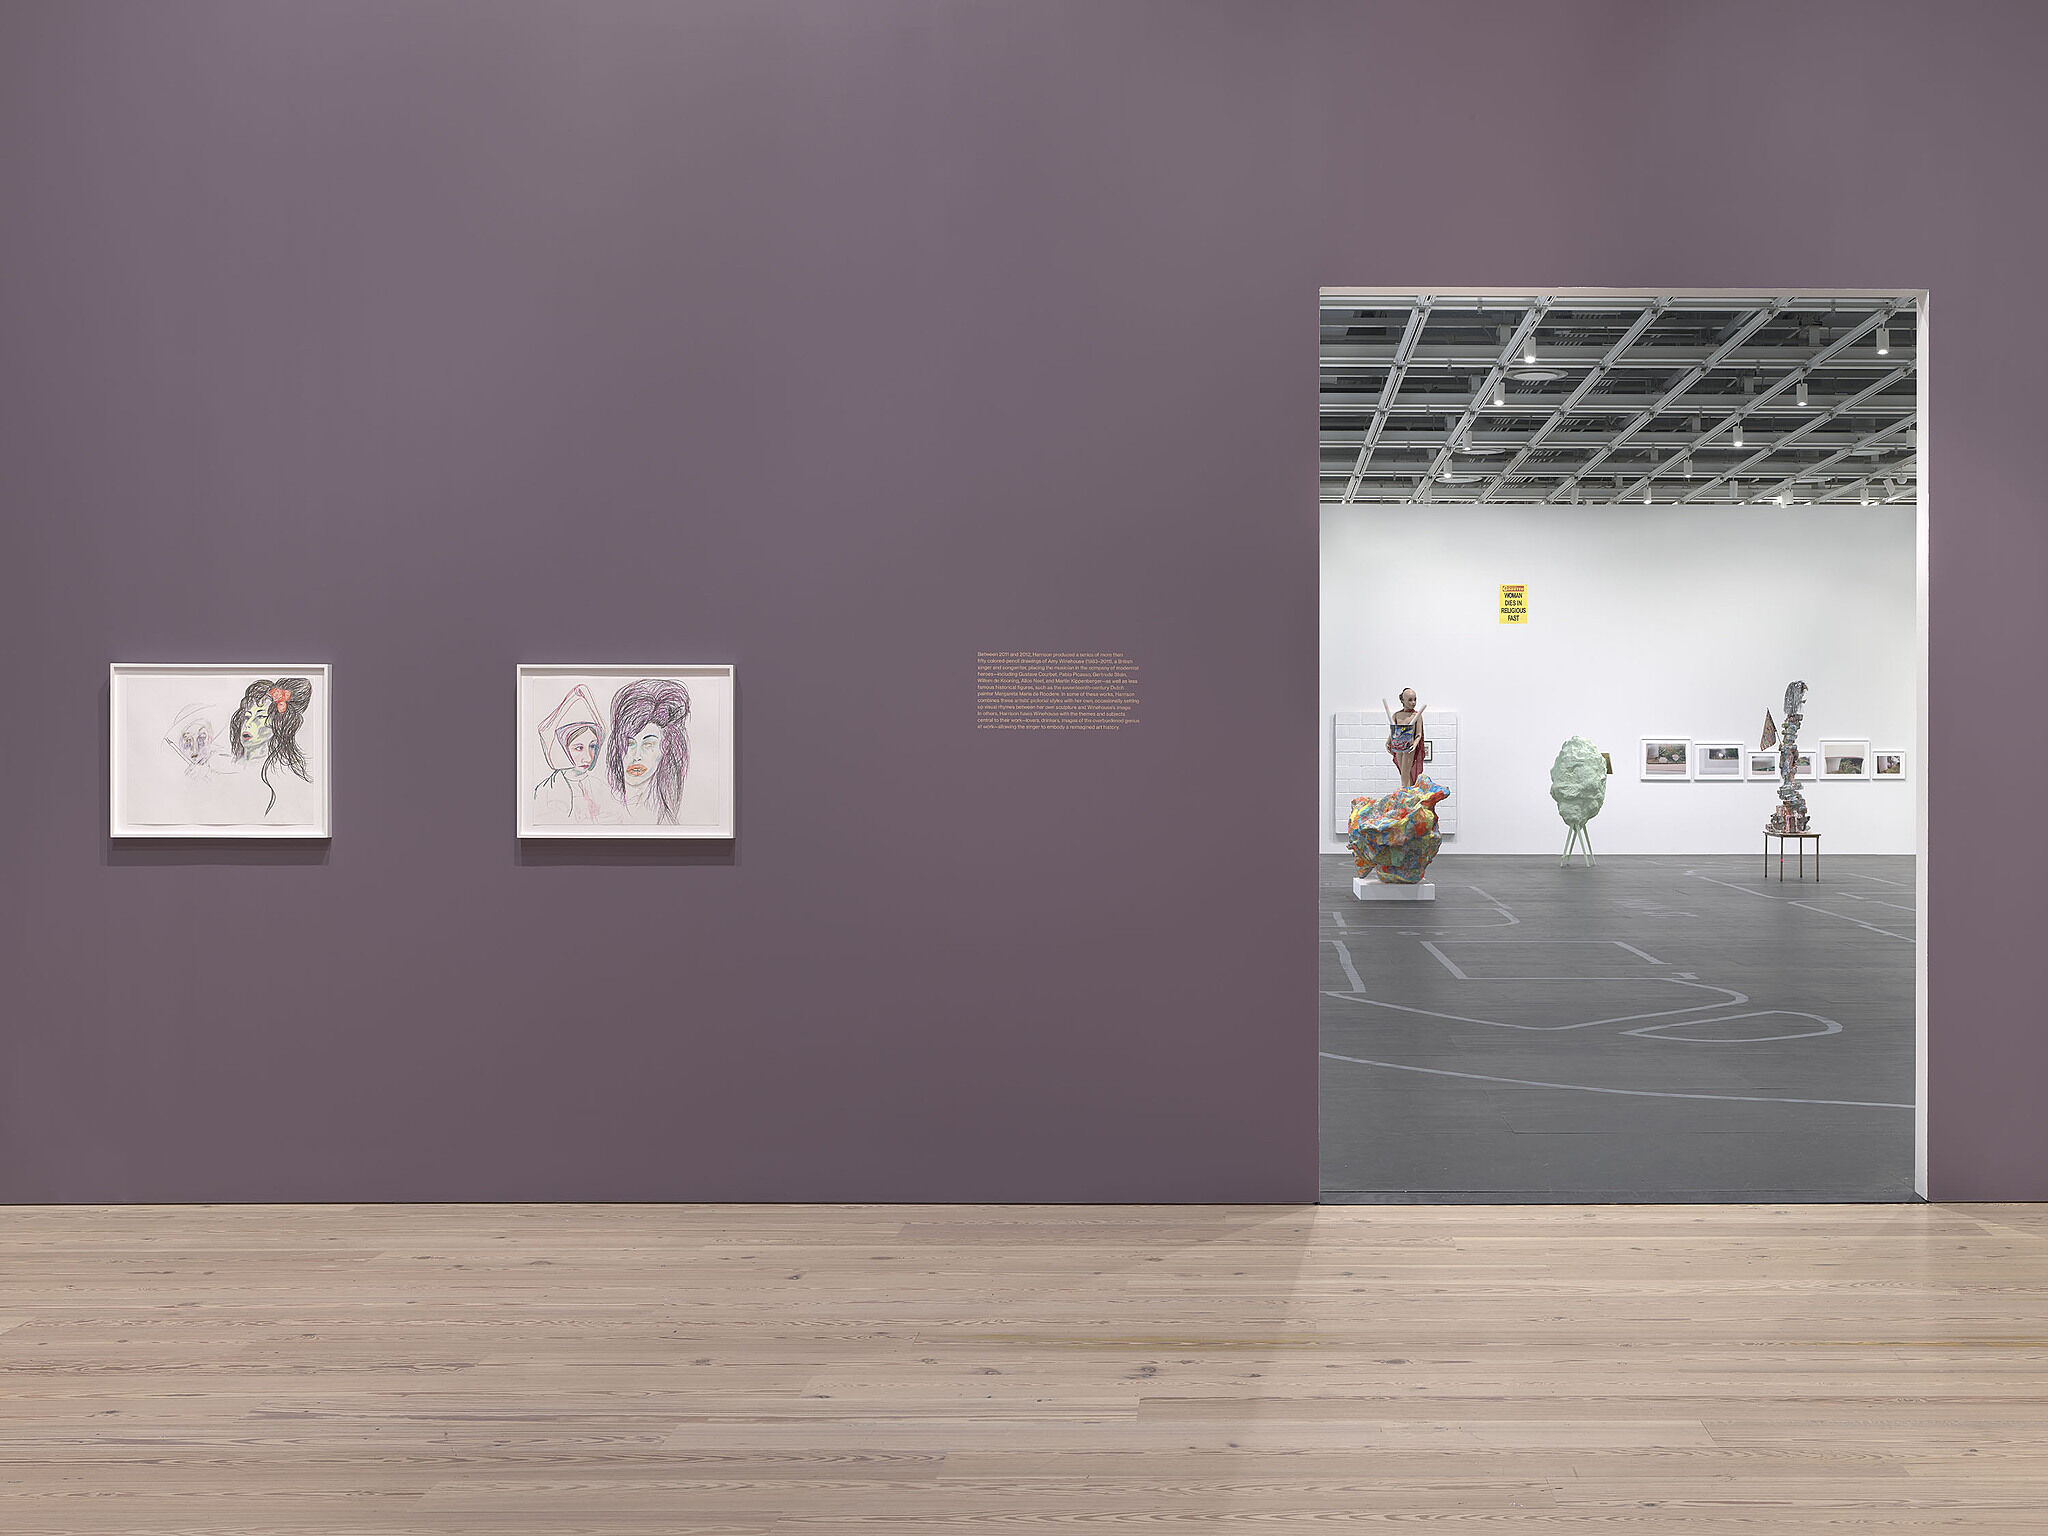 An image of the Whitney galleries with various sculptures and artworks on the walls.